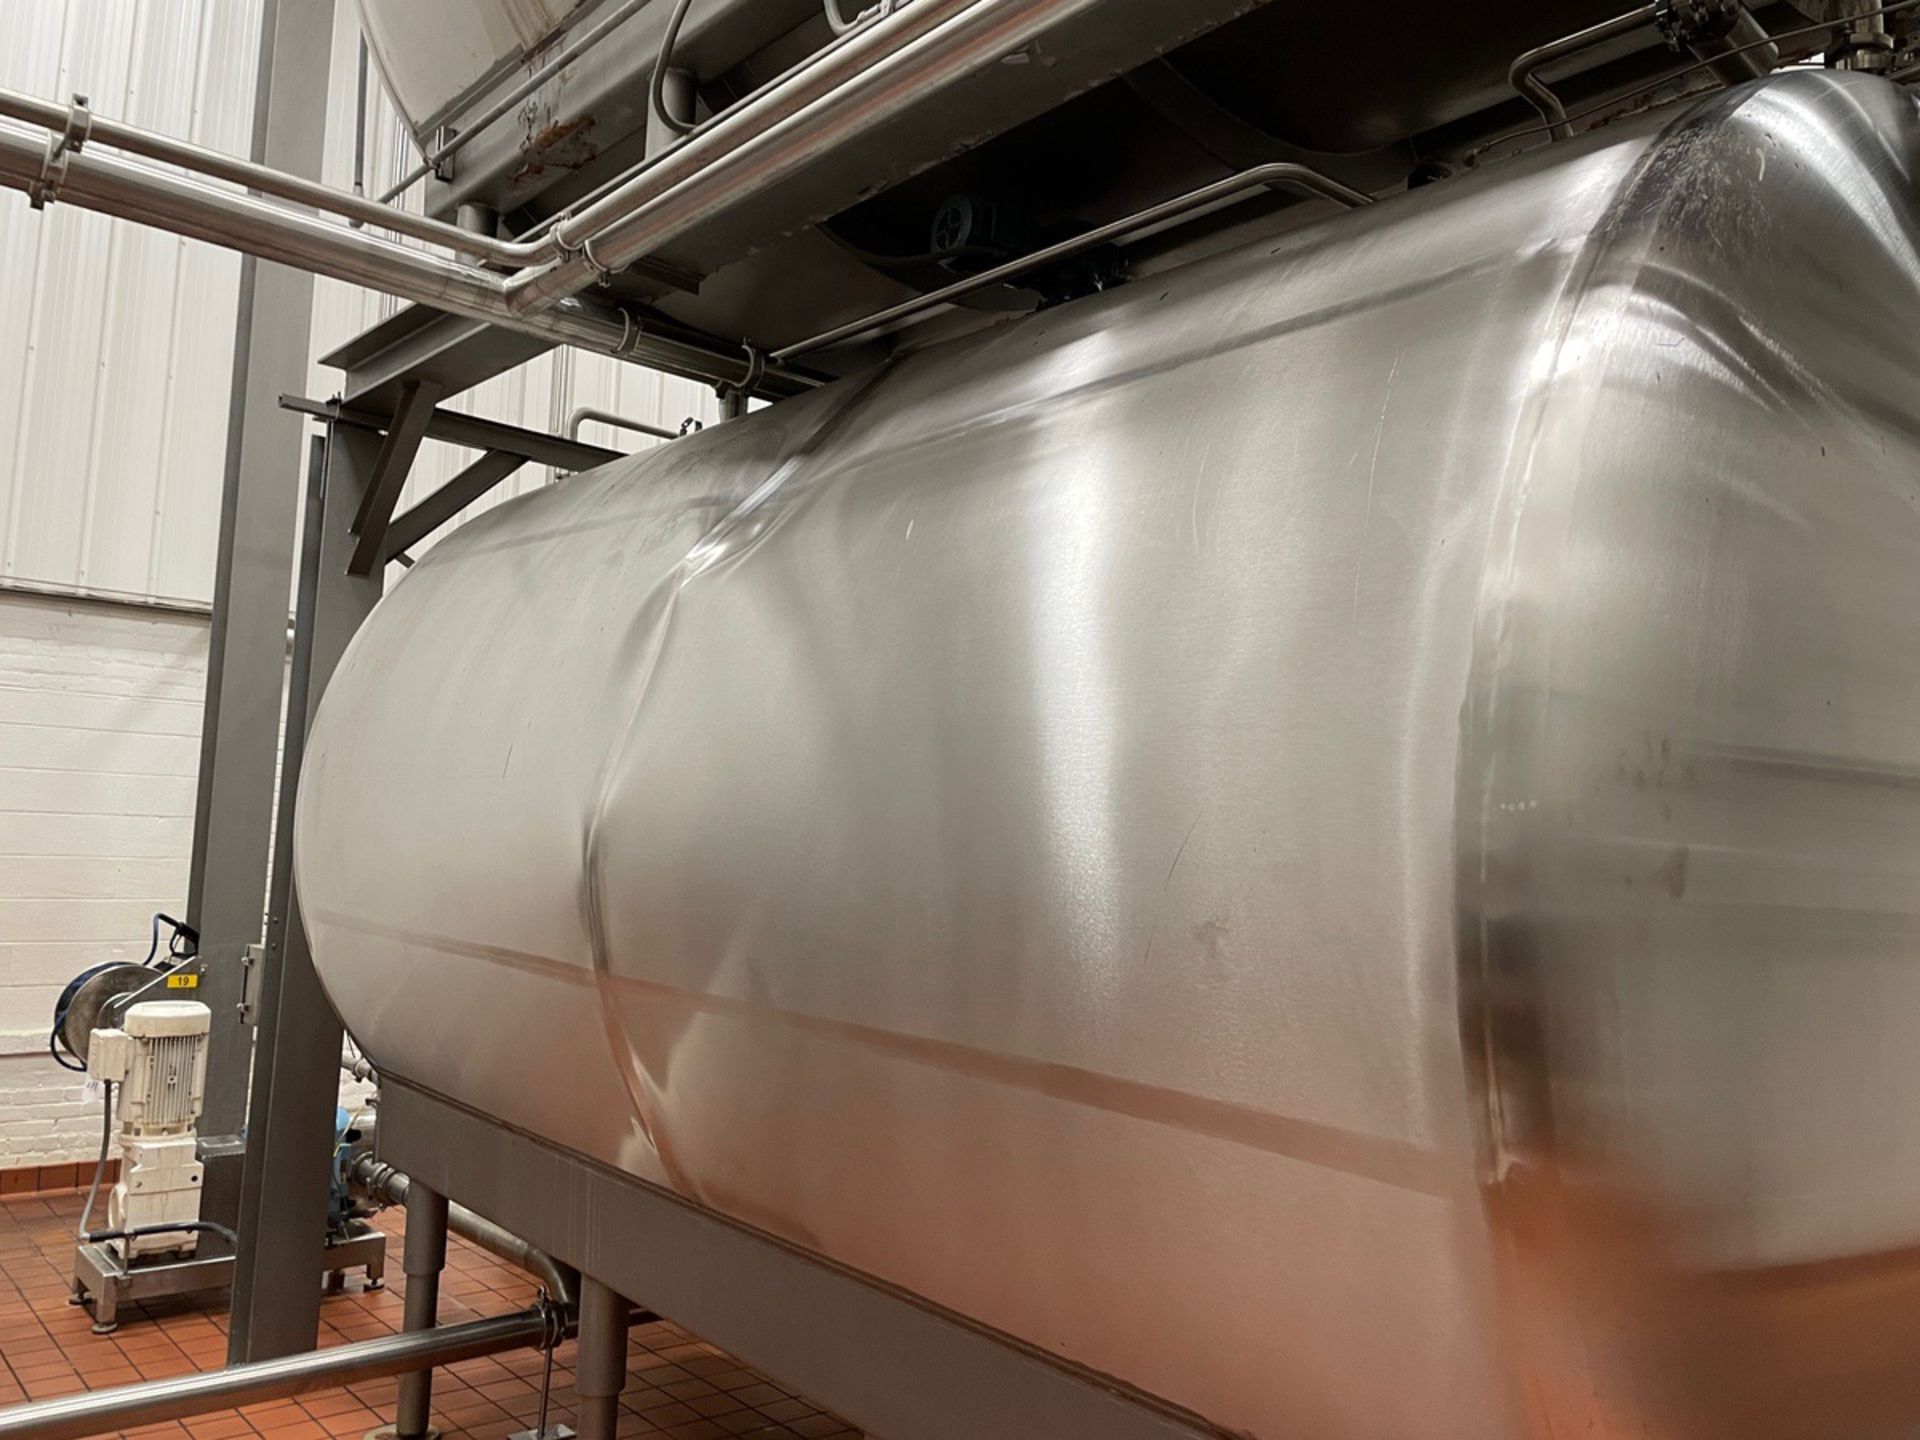 Creamery Package 5,300 Gallon Stainless Steel Horizontal Tank, Vertical Agitation, | Rig Fee: $3500 - Image 2 of 8